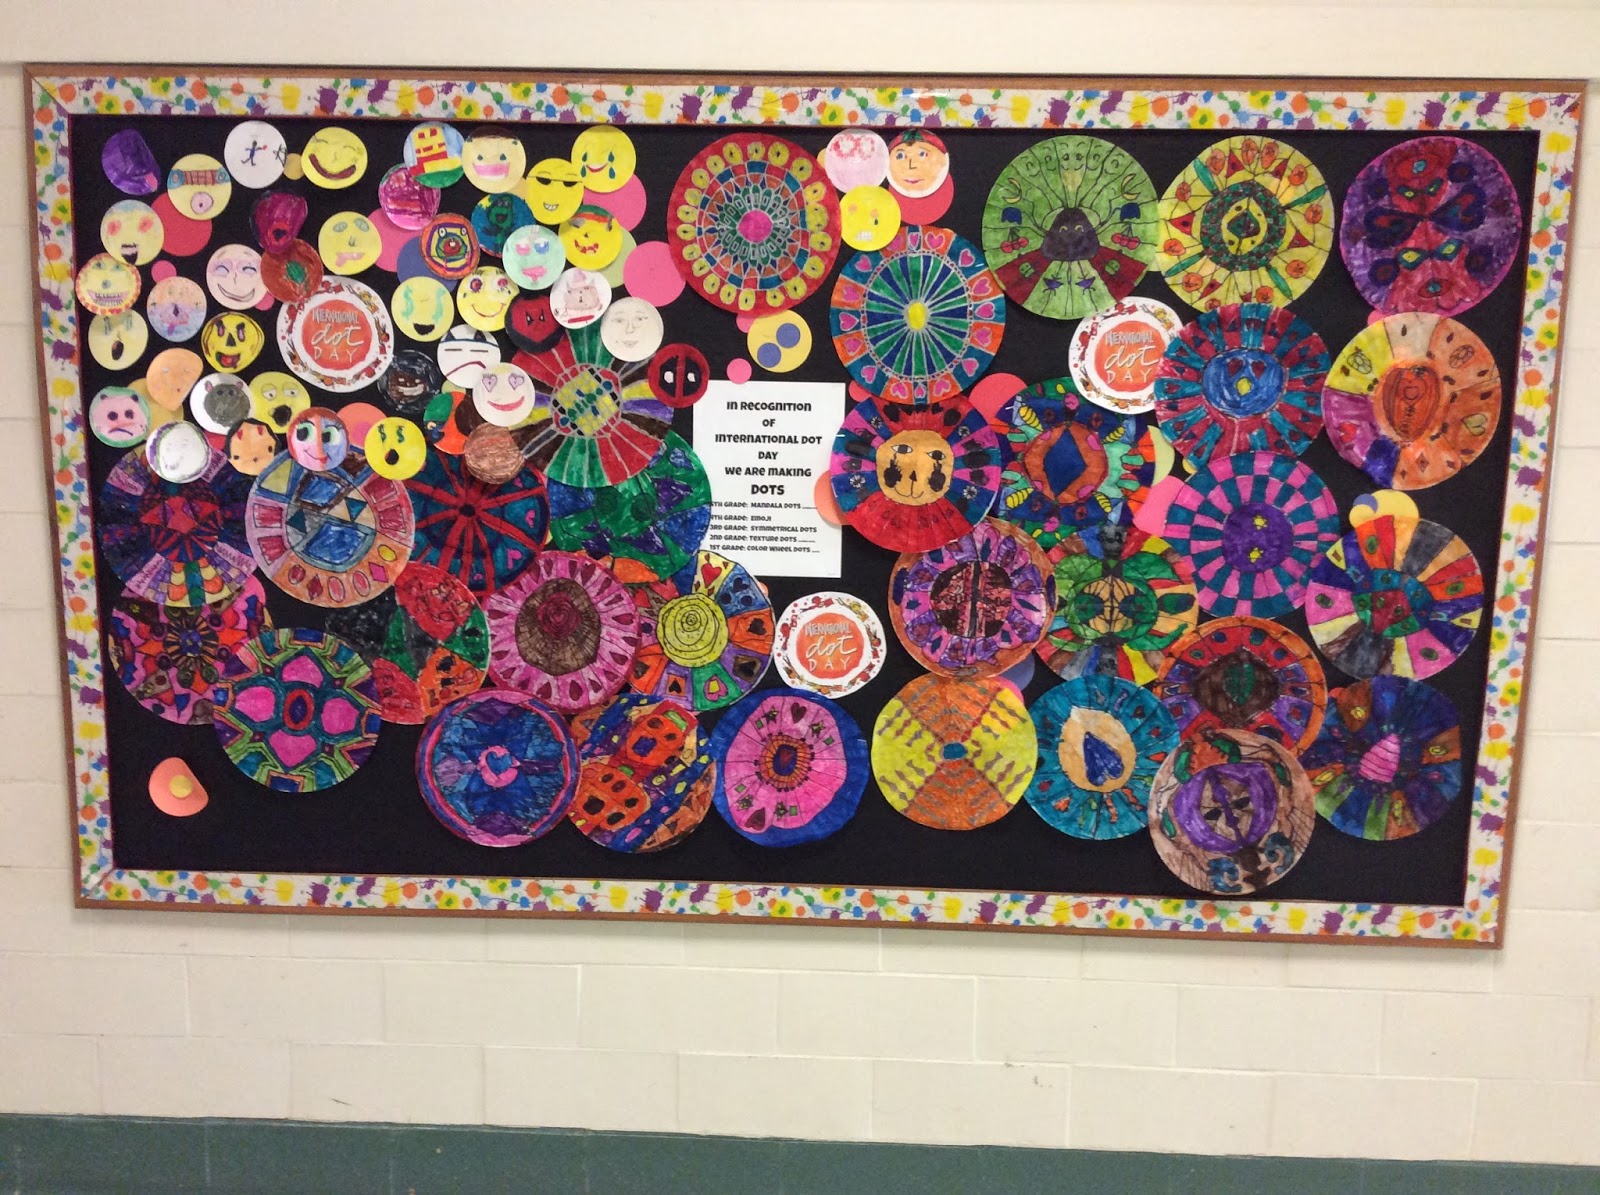 ART ON MY HANDS: Bulletin Boards and Art displays